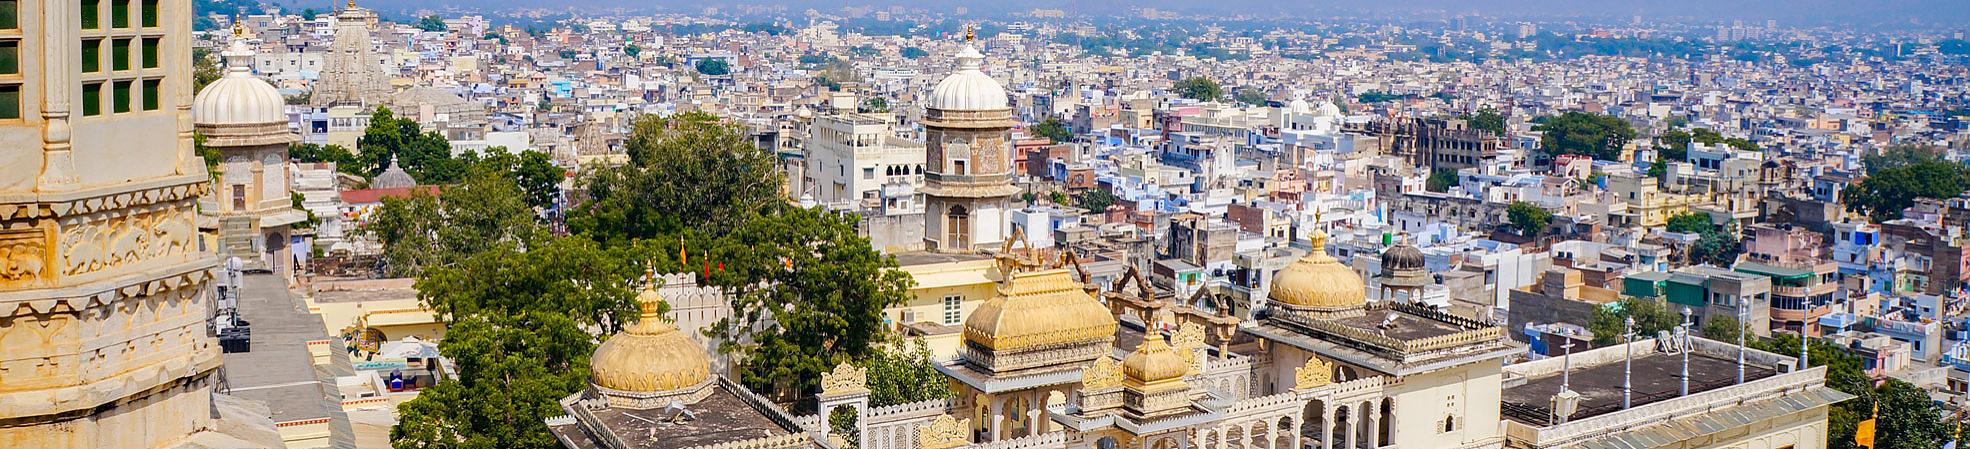 Udaipur Rated No.3 of the 2018 World's Top 15 Cities